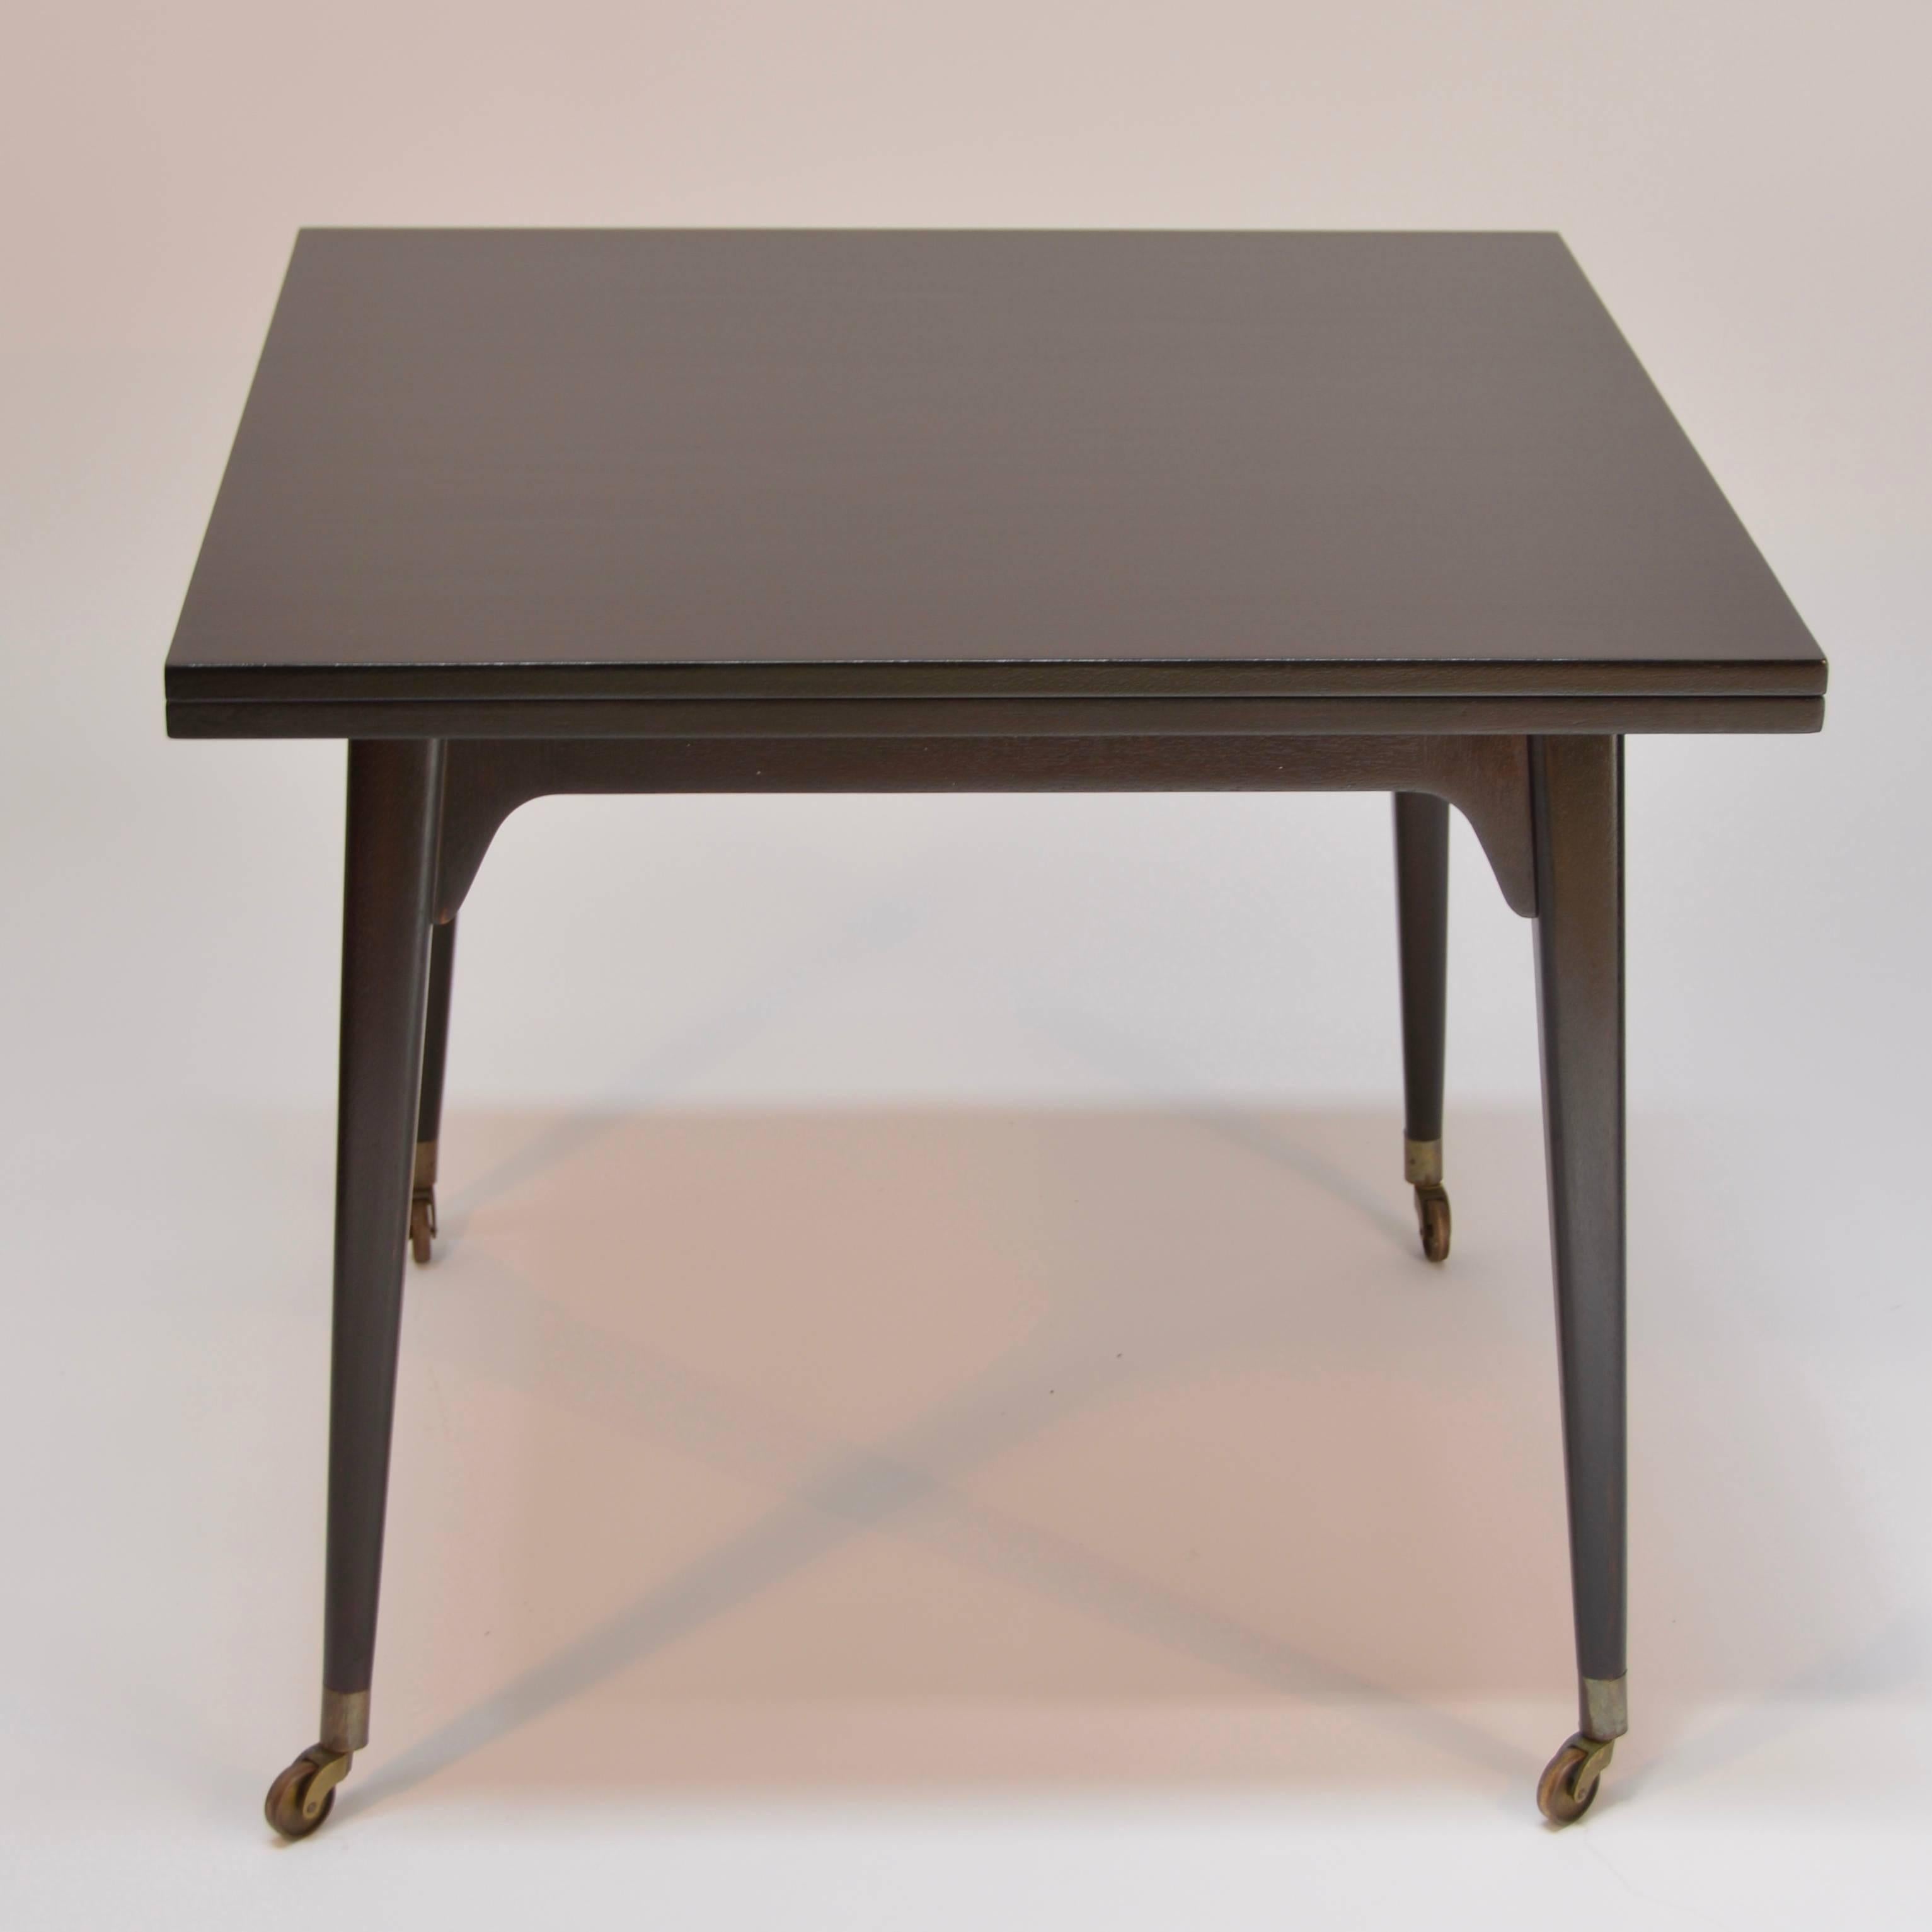 This is a restored Edward Wormley for Dunbar ebonized mahogany, flip-top game table. Top pivots and unfolds to 68" wide and can easily be rolled on brass castors. Also includes a large storage area for all of your gaming needs.